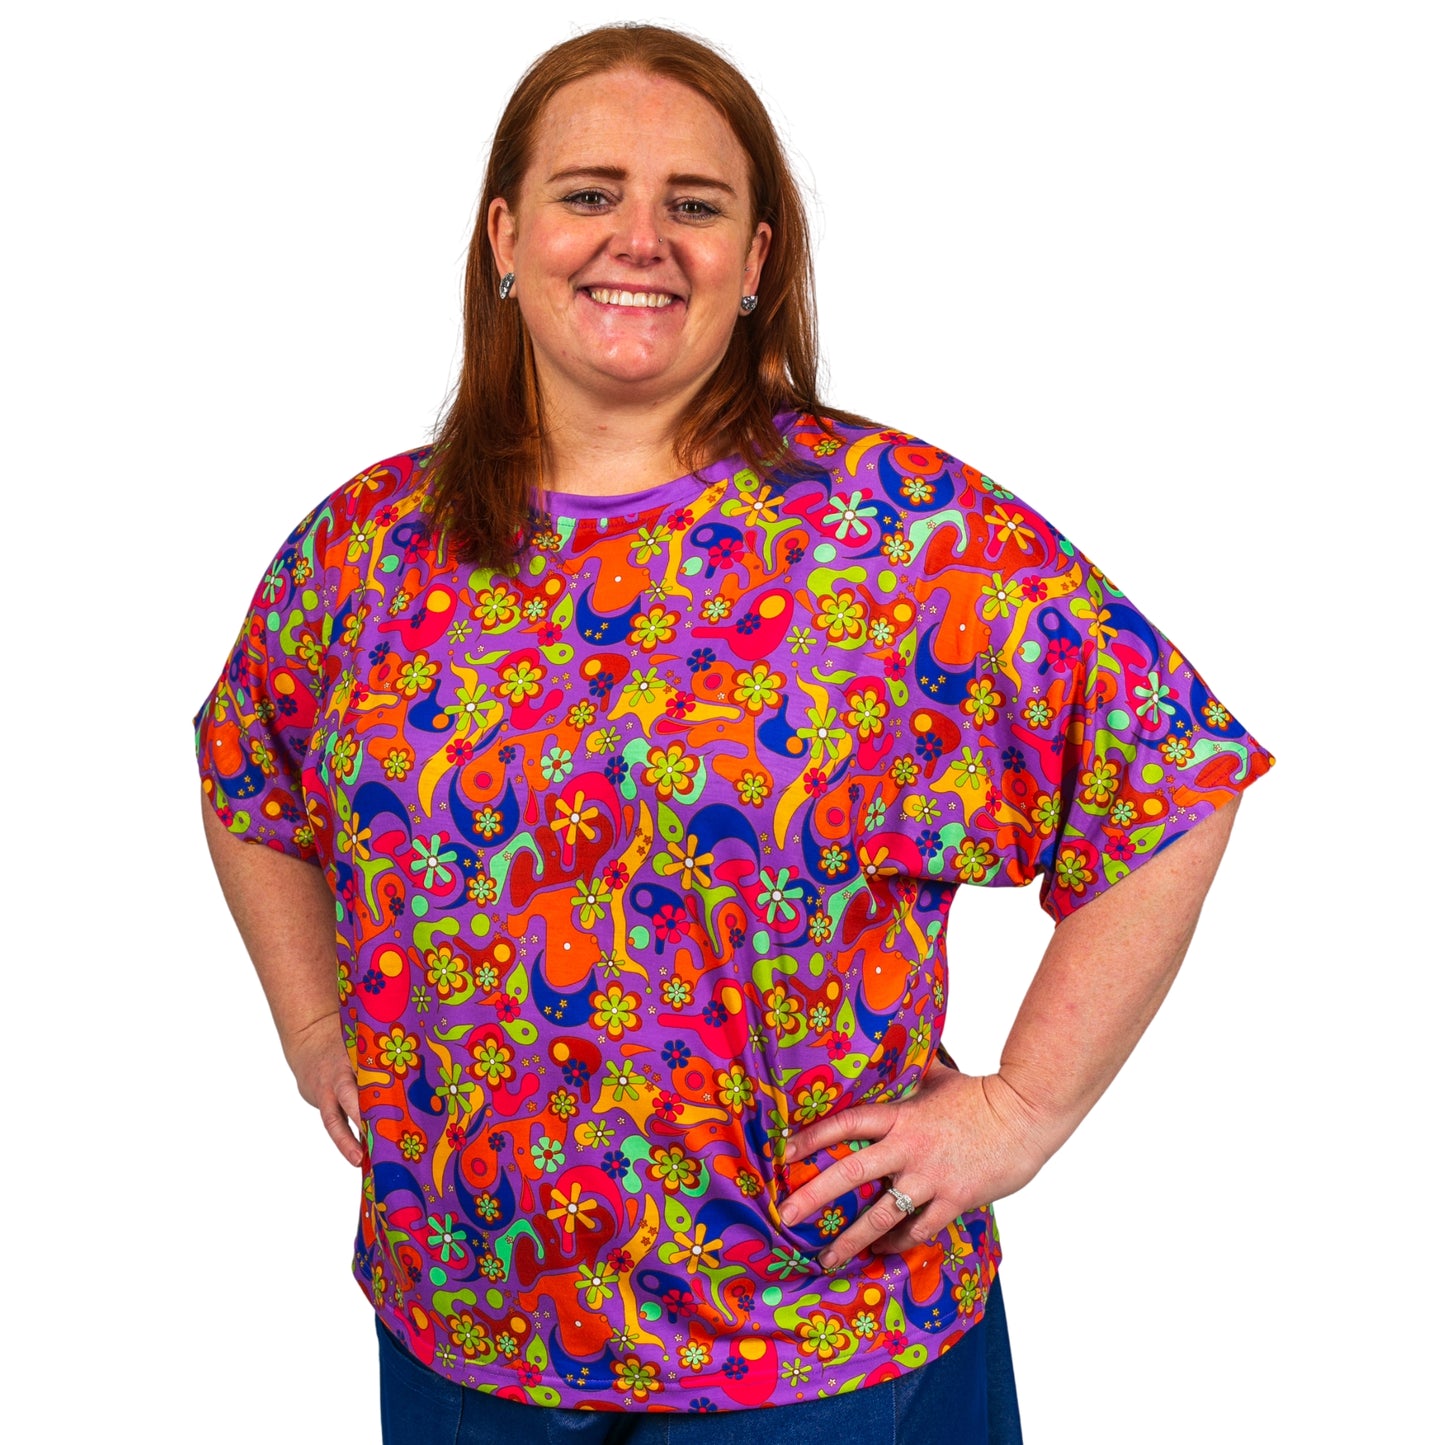 Flower Power Batwing Top by RainbowsAndFairies.com.au (Floral Print - Woodstock - Psychedelic Print - Knit Top - Kitsch - Vintage Inspired - Retro Top) - SKU: CL_BATOP_FLOPO_ORG - Pic-02